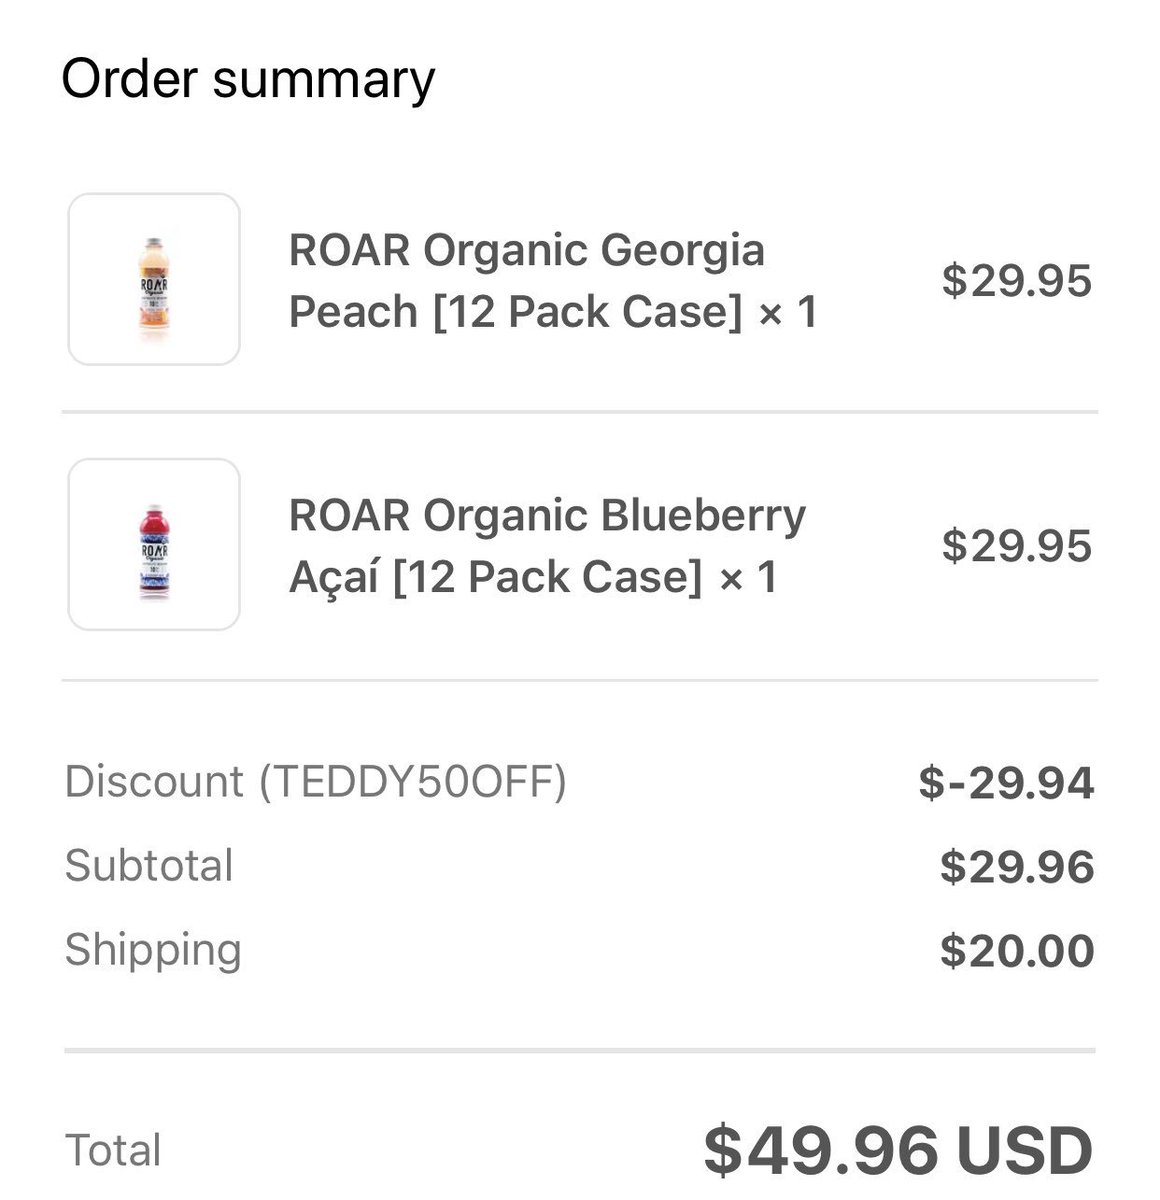 Thanks @ROARorganic and @OhItsTeddy. Looking forward to trying these flavors. 🙏🏼